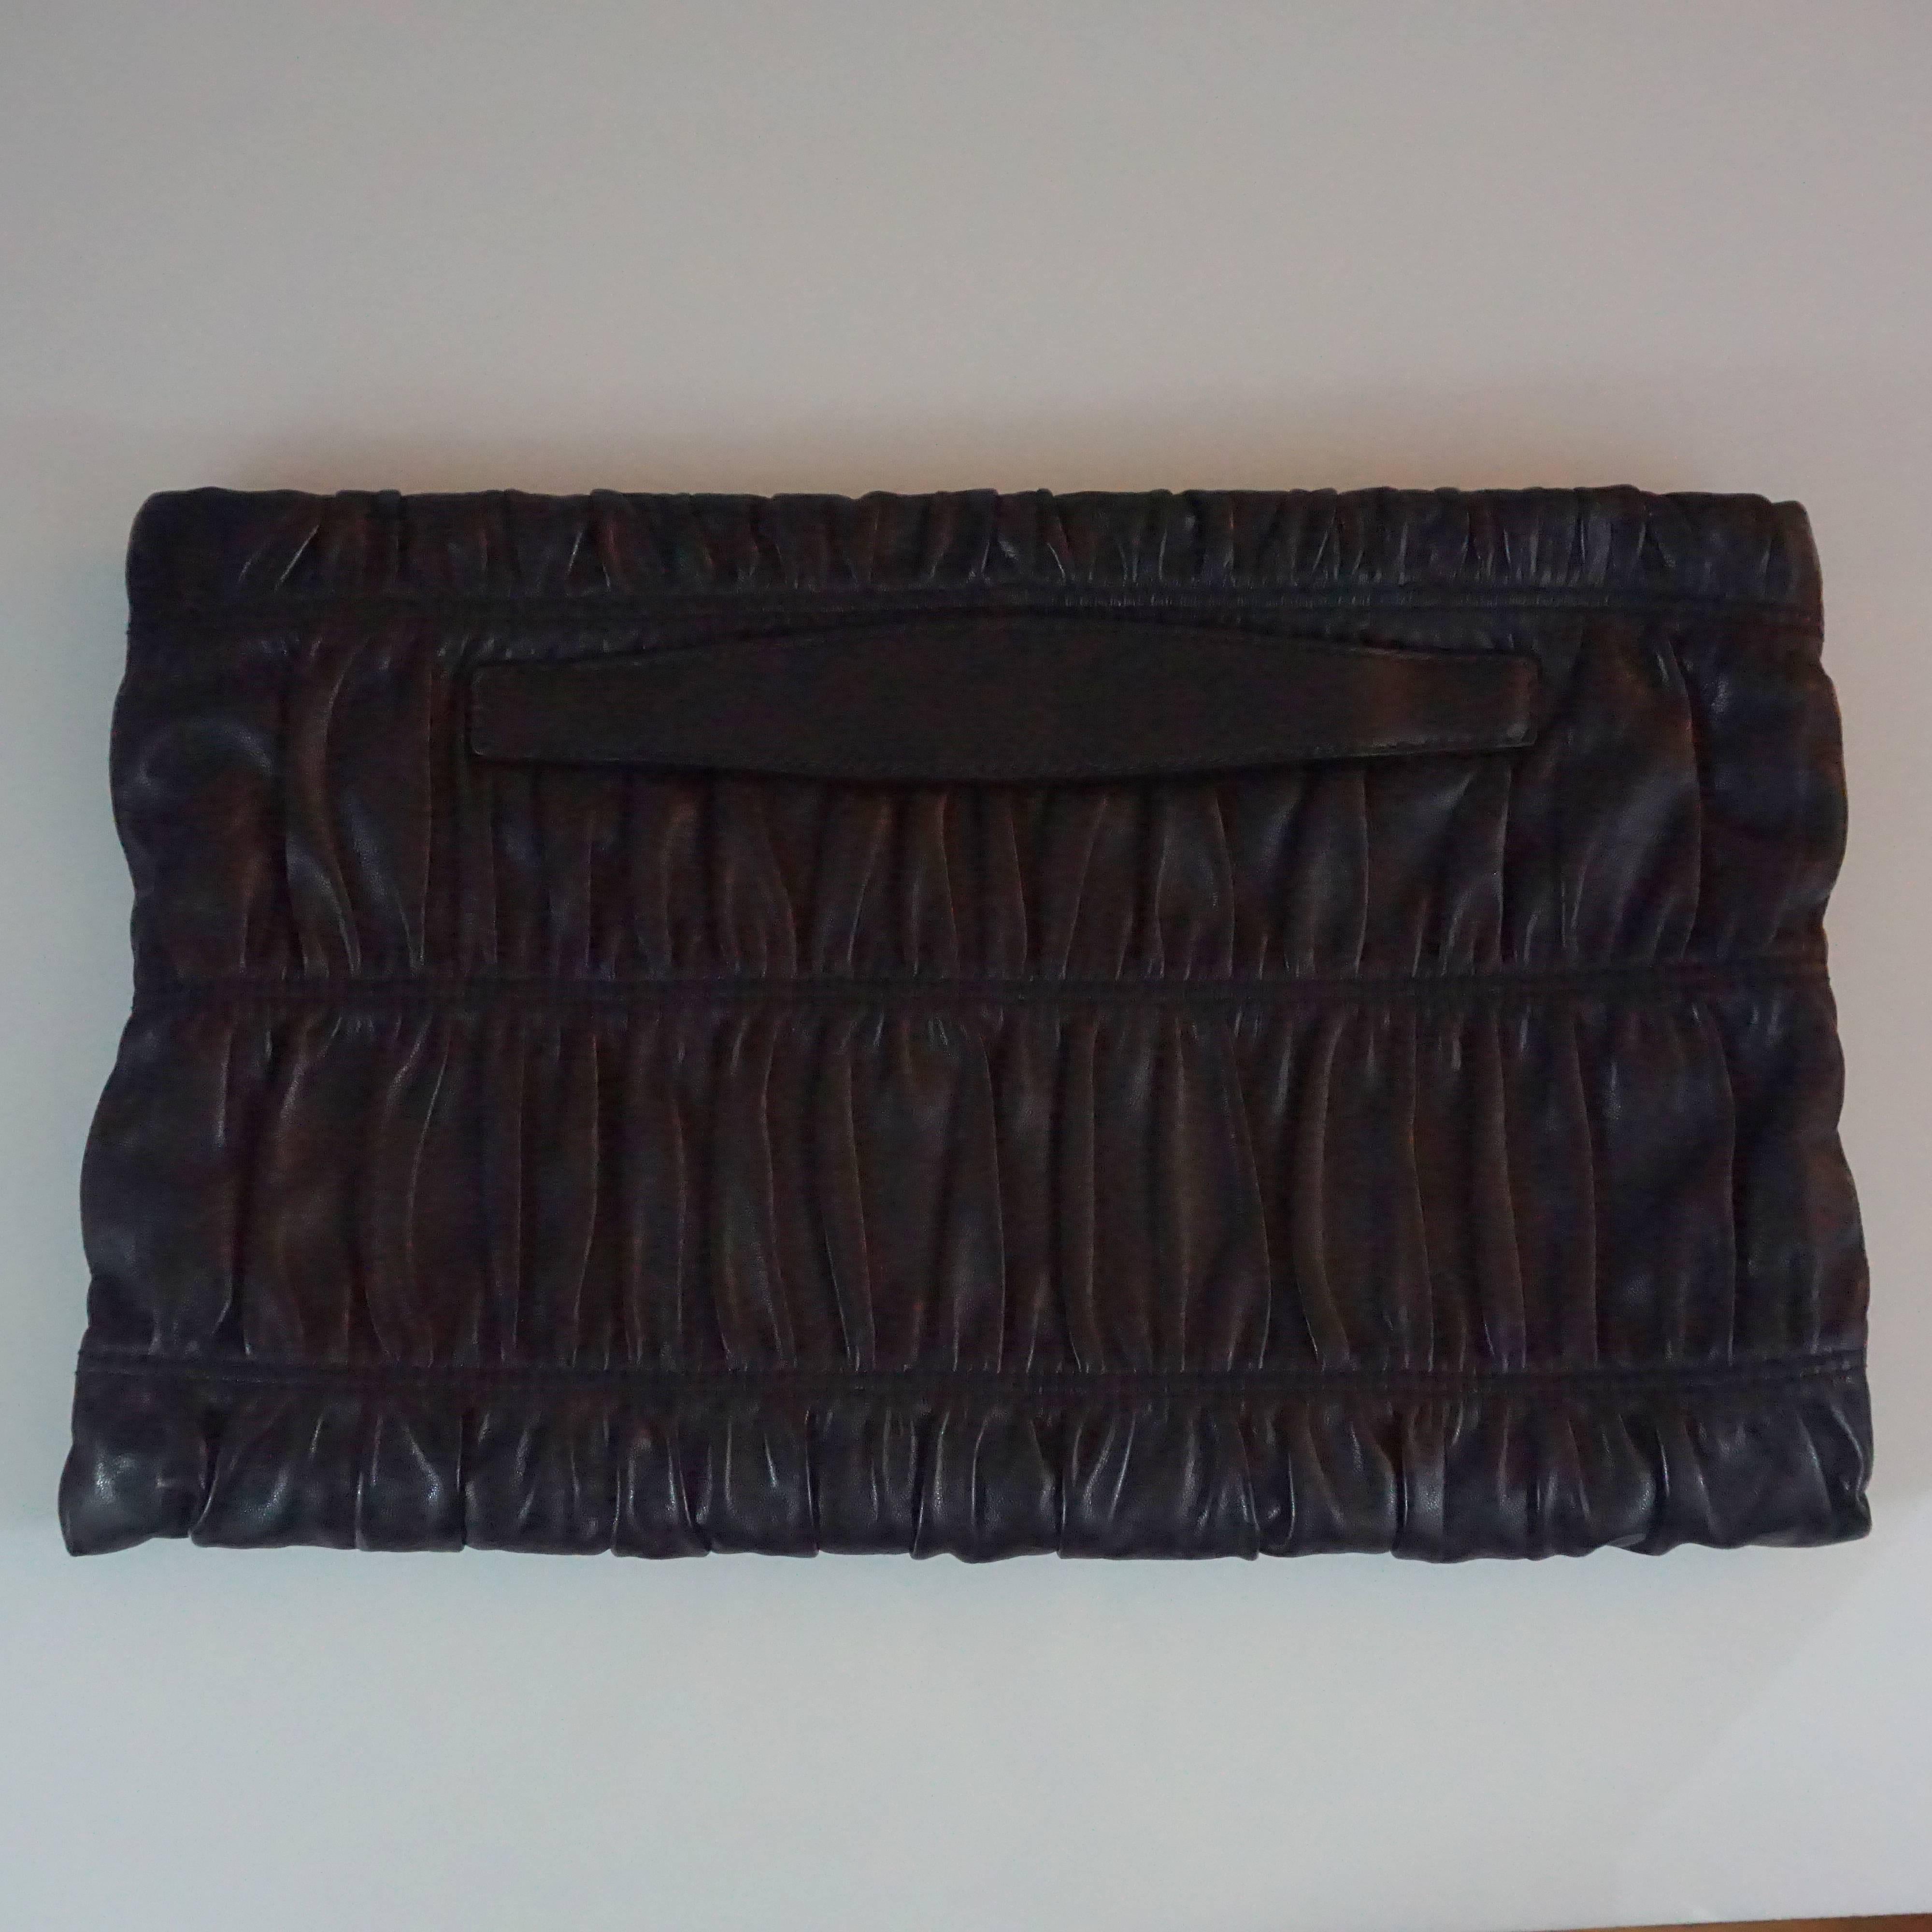 Prada Black Ruched Lambskin Nappa Gaufre Clutch - GHW. The beautiful oversized clutch is very versatile and features ruching, a gold Prada emblem, blush leather interior, 1 main compartment, 2 small side pockets, 1 one zip pocket, and a back handle.